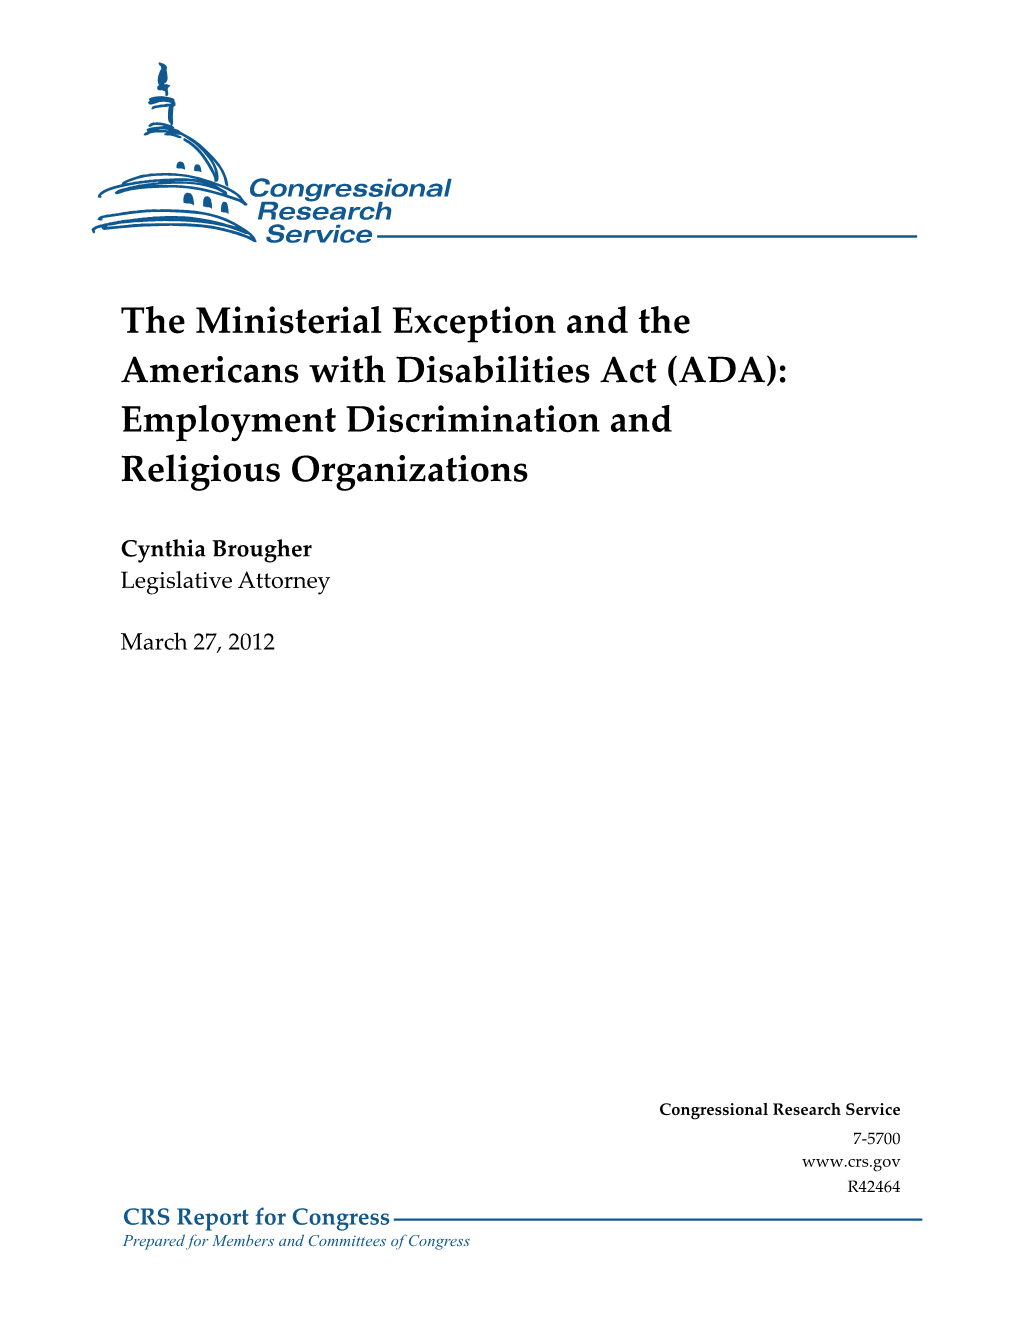 The Ministerial Exception and the Americans with Disabilities Act (ADA): Employment Discrimination and Religious Organizations